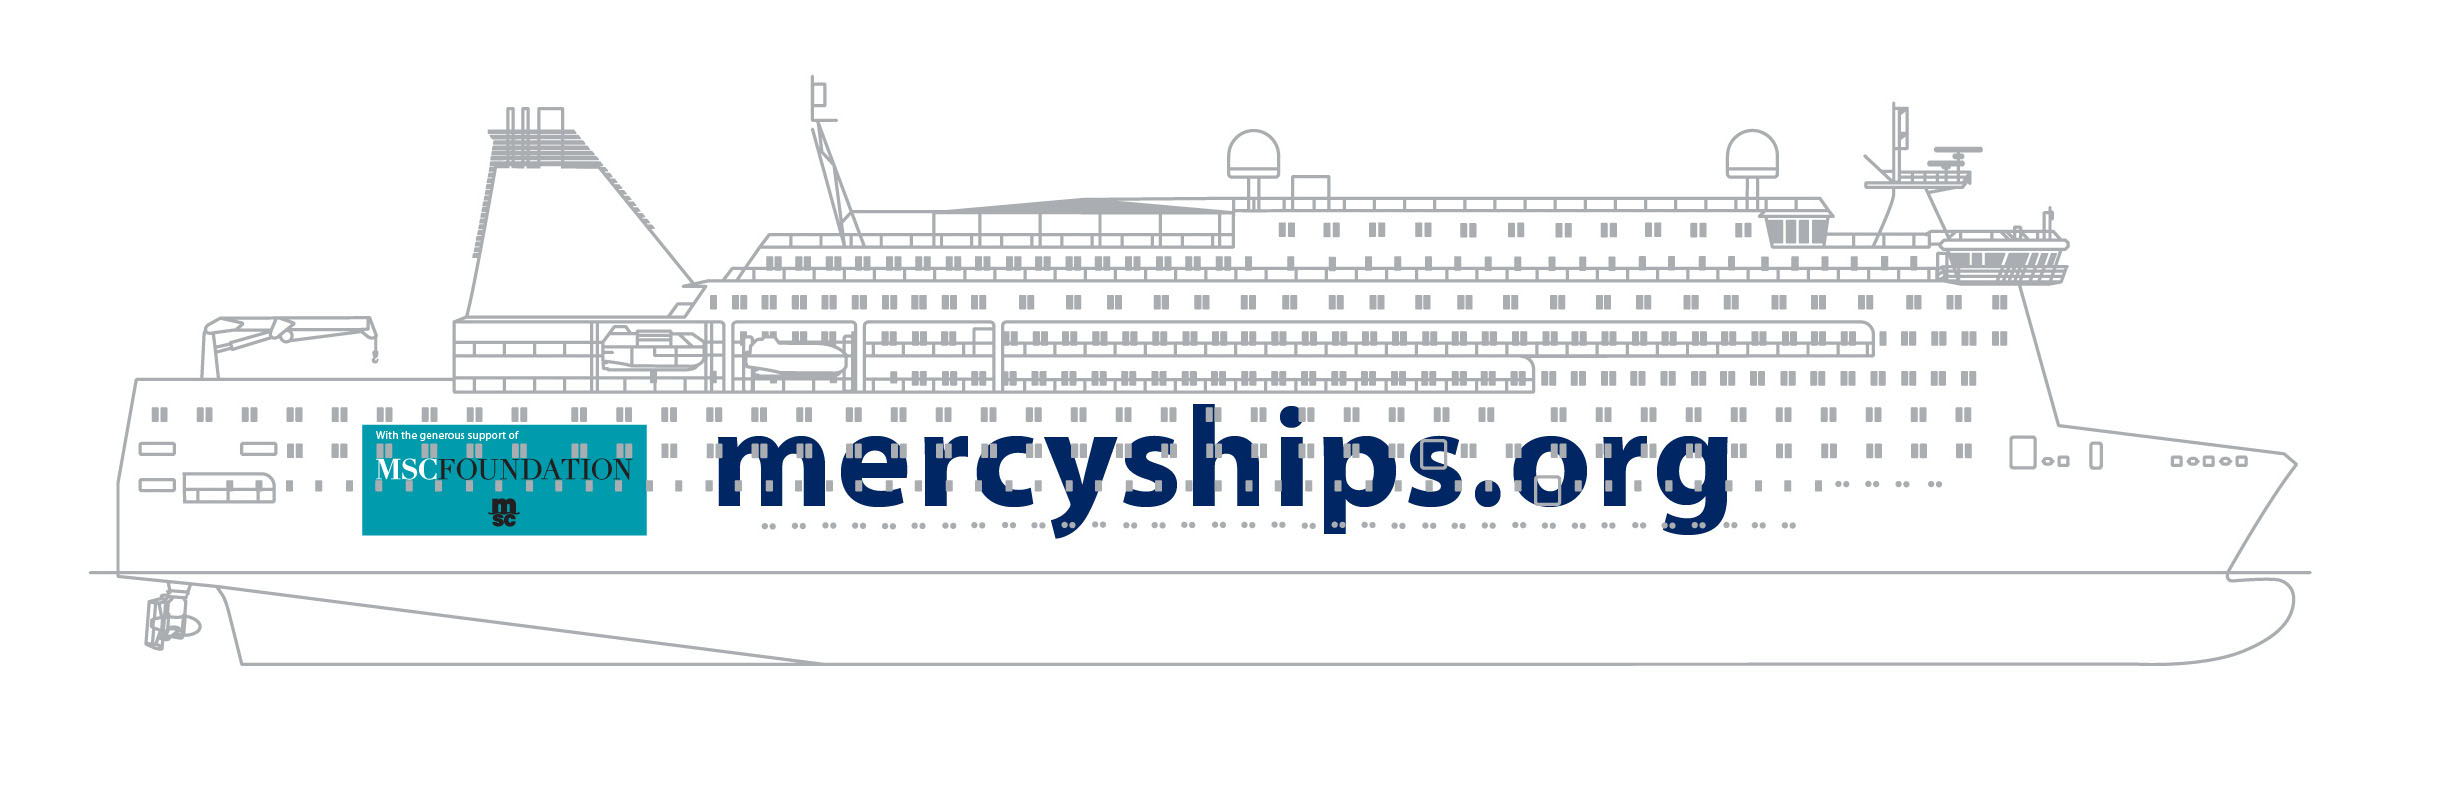 The new purpose-built hospital ship will be designed to similar specifications as the Global Mercy.